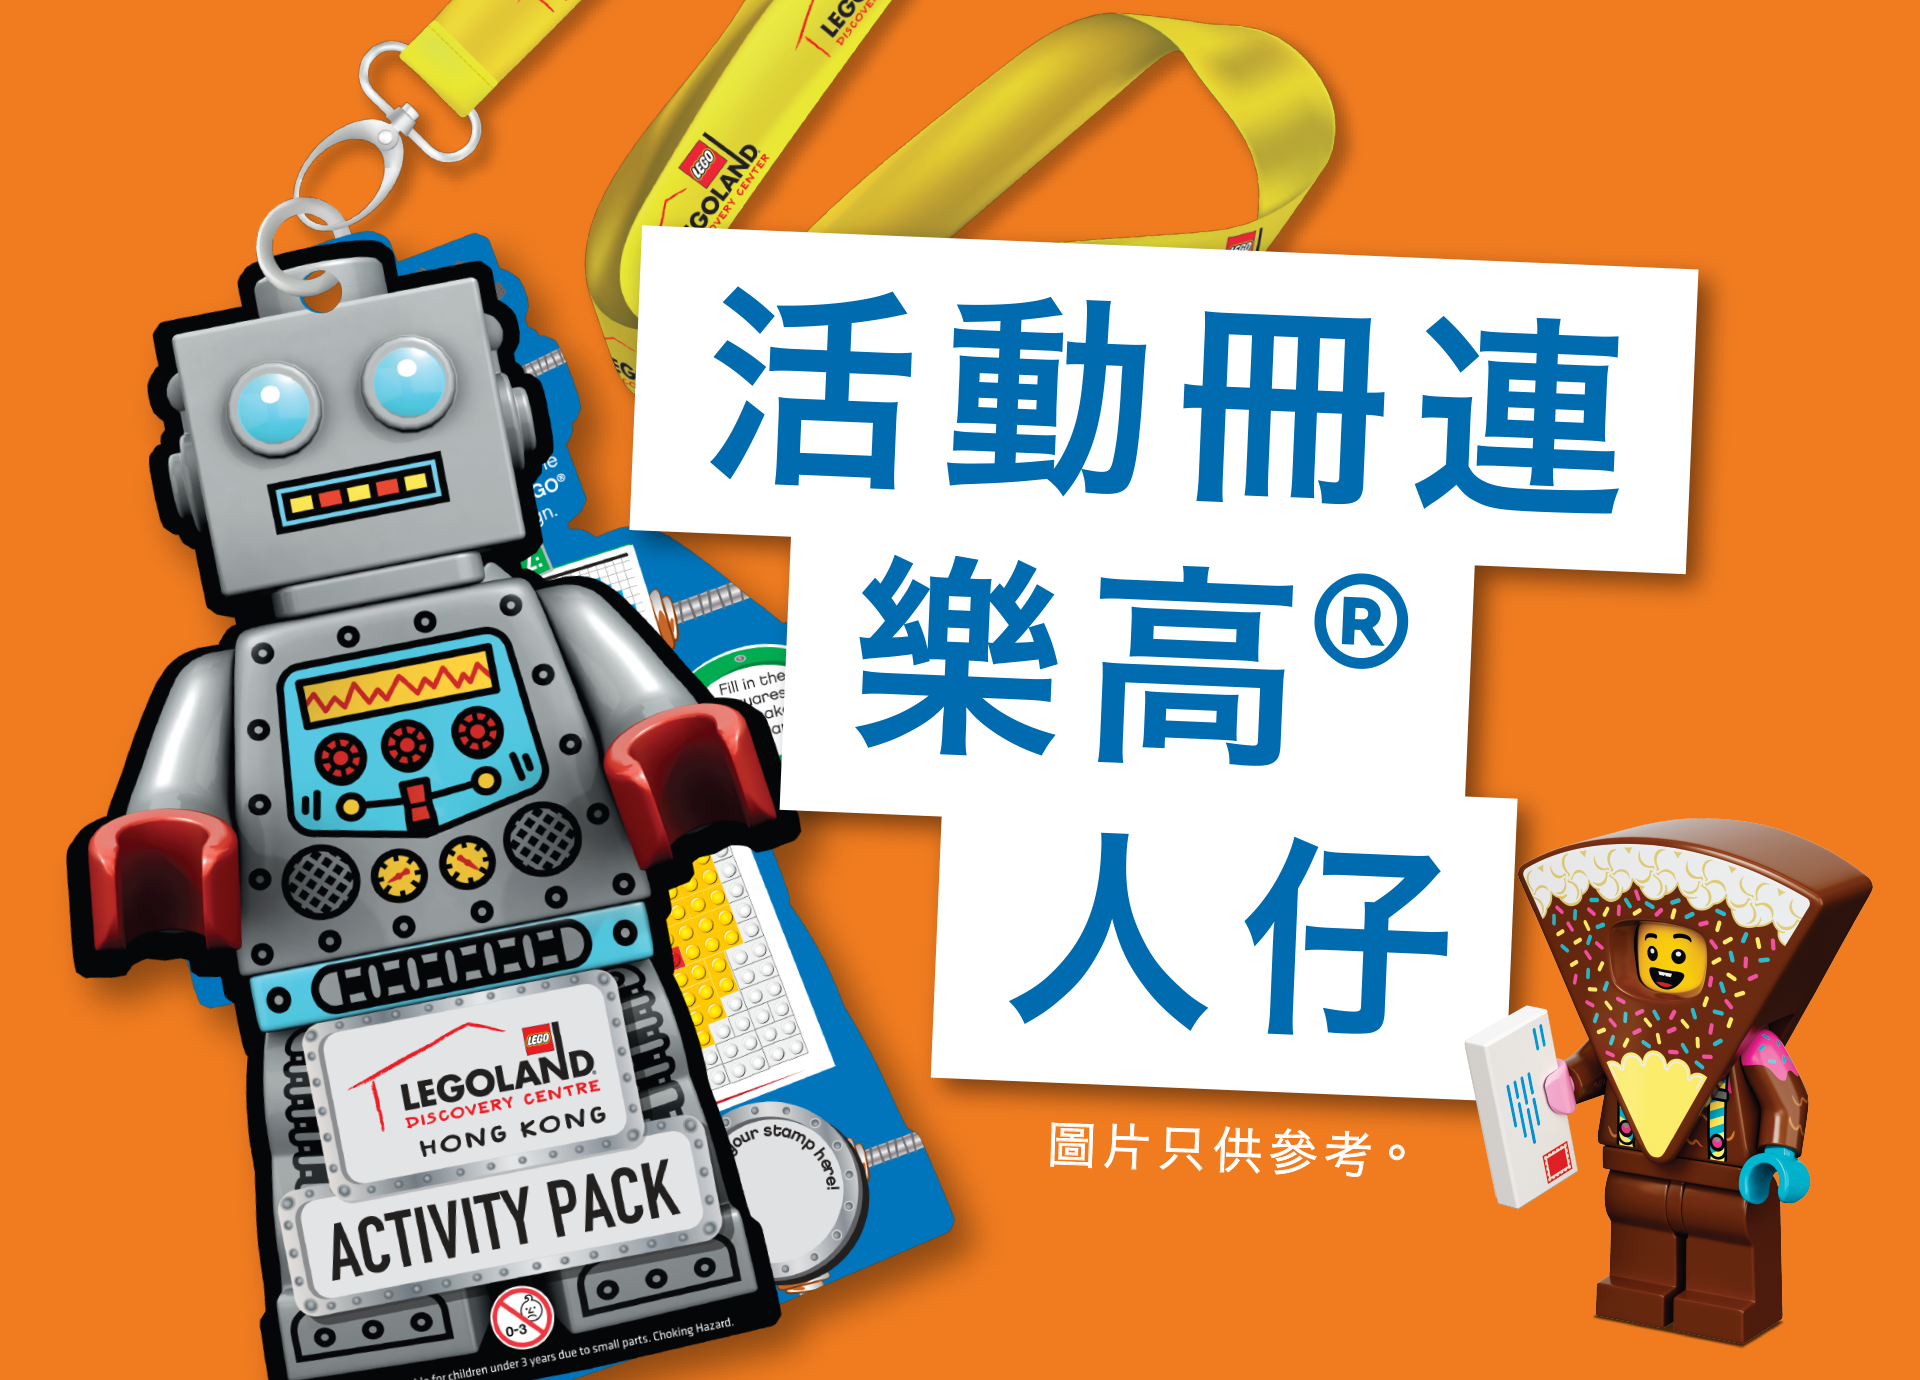 LDCHK Website Images ACTIVITY PACK WITH LANYARD 1920X1380px CHI